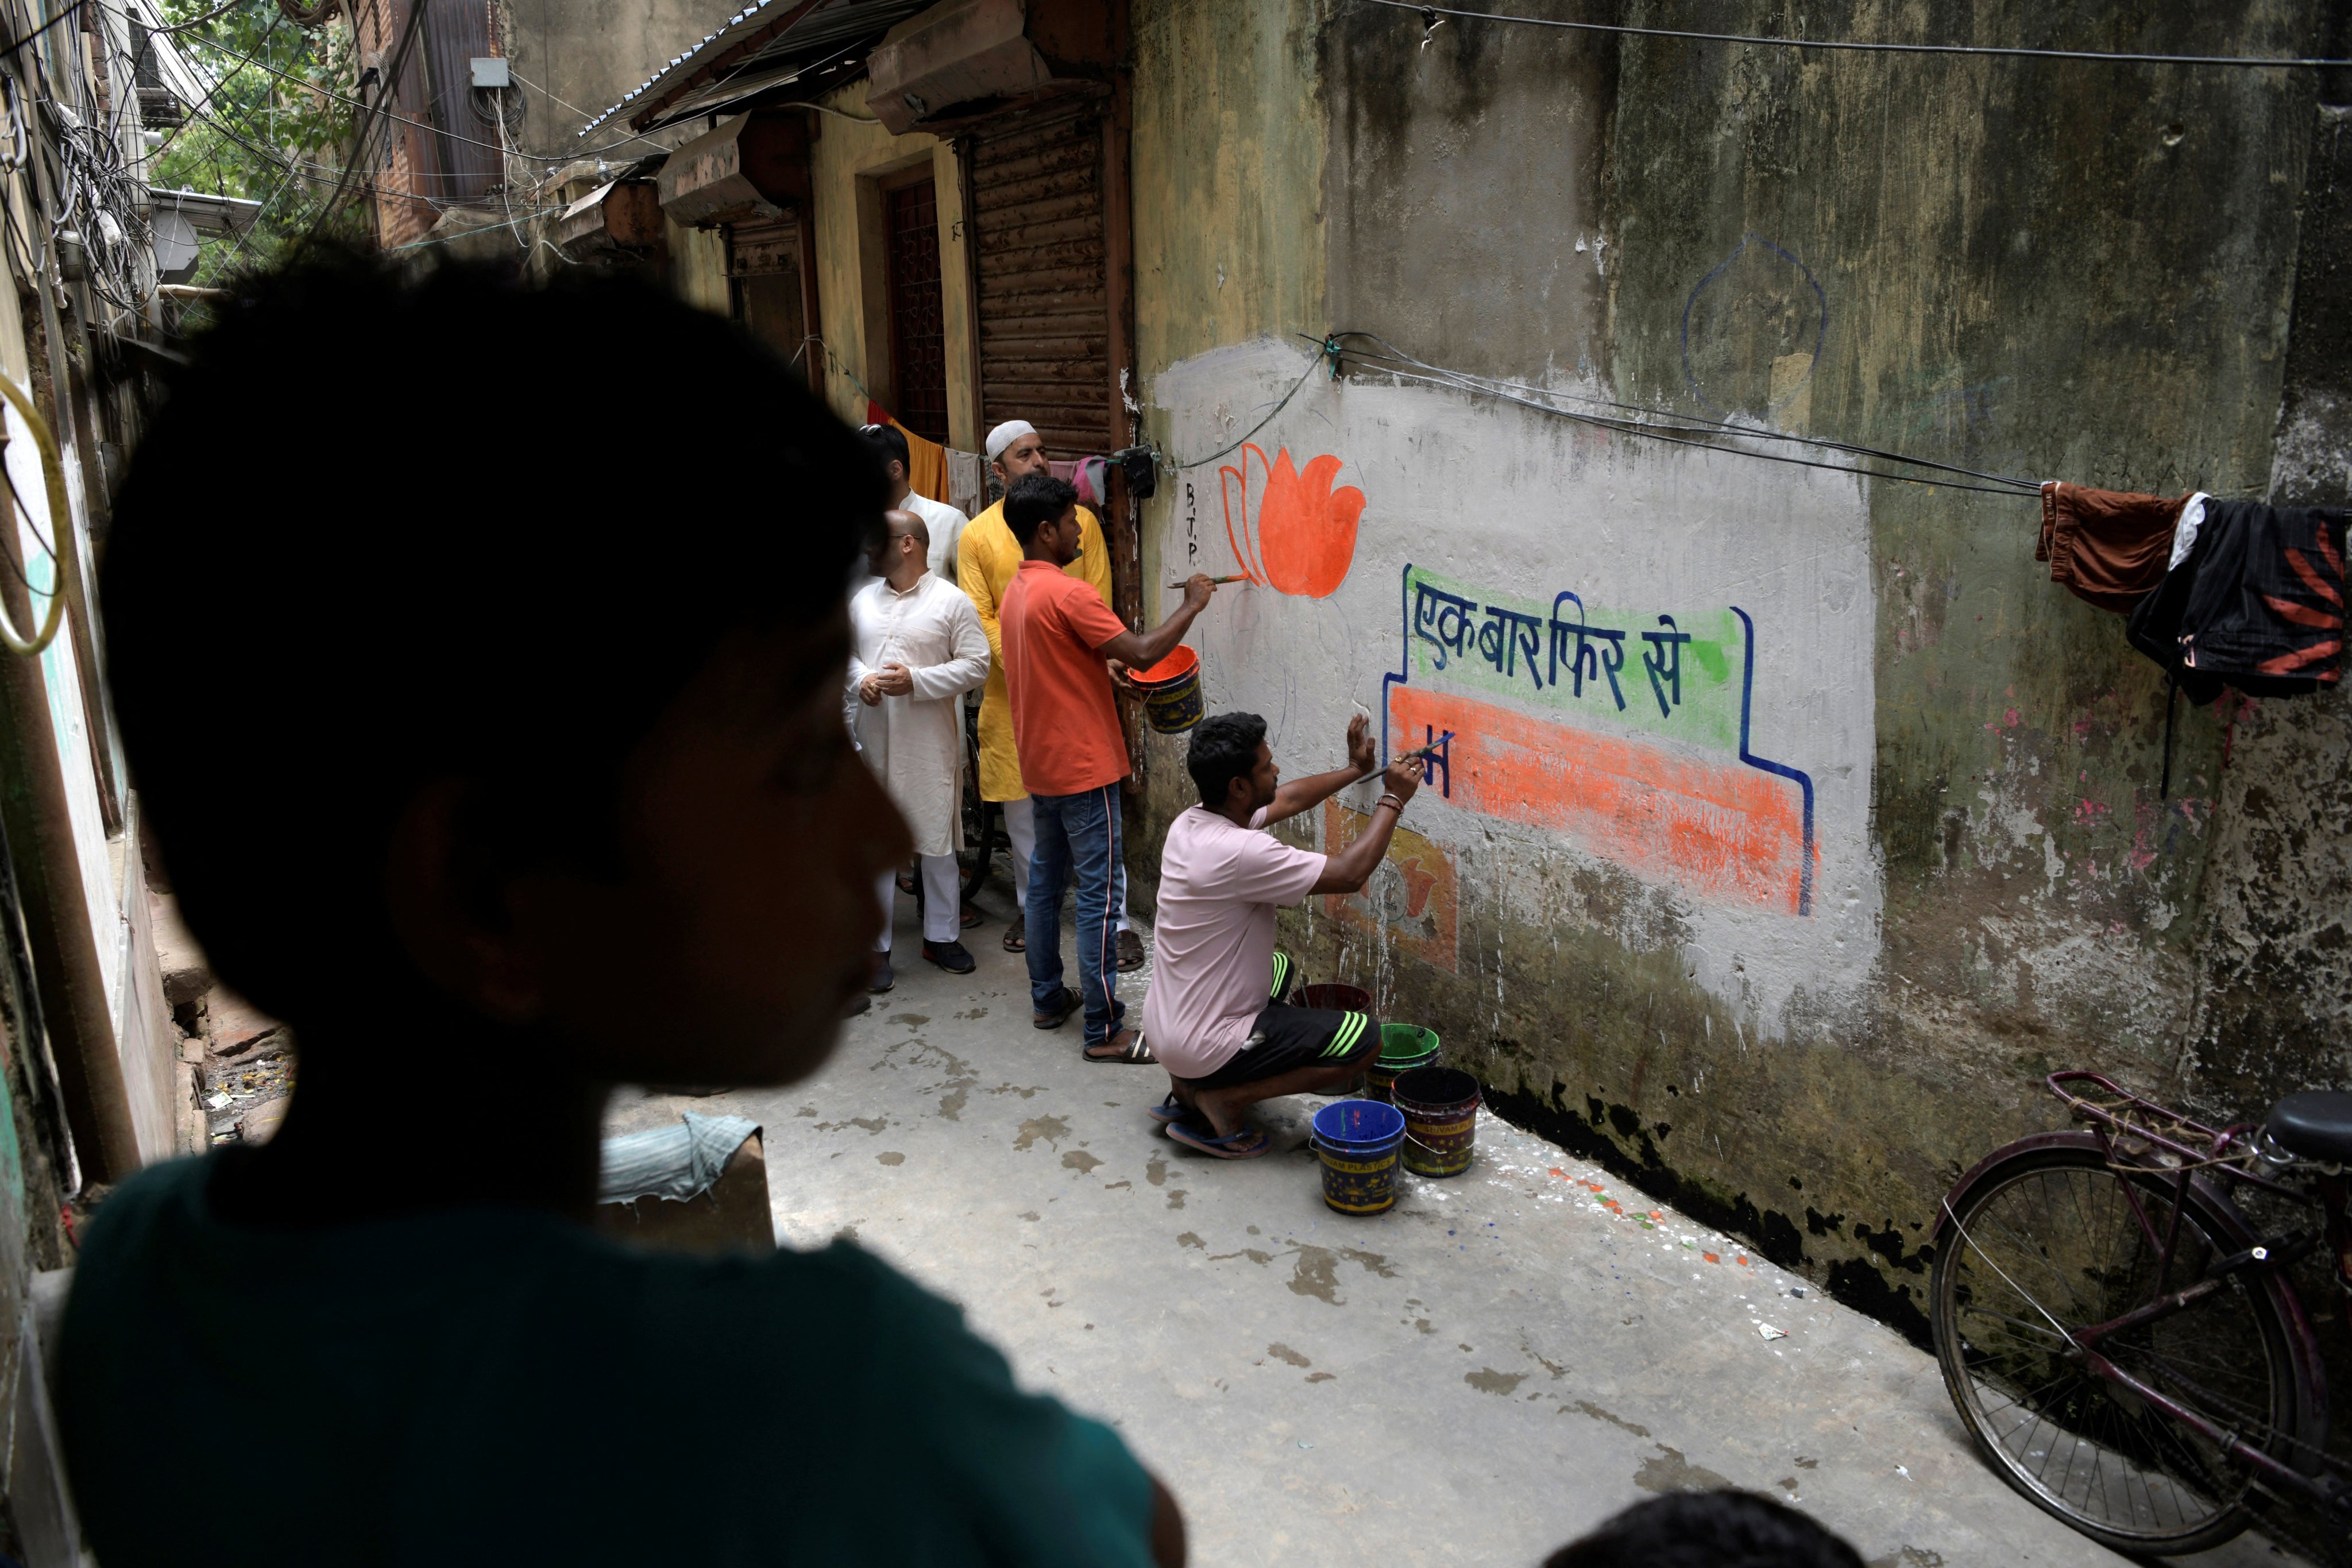 Workers from India’s ruling Bharatiya Janata Party (BJP) paint slogans and party symbols on a wall in Kolkata as part of an outreach programme. Photo: Reuters